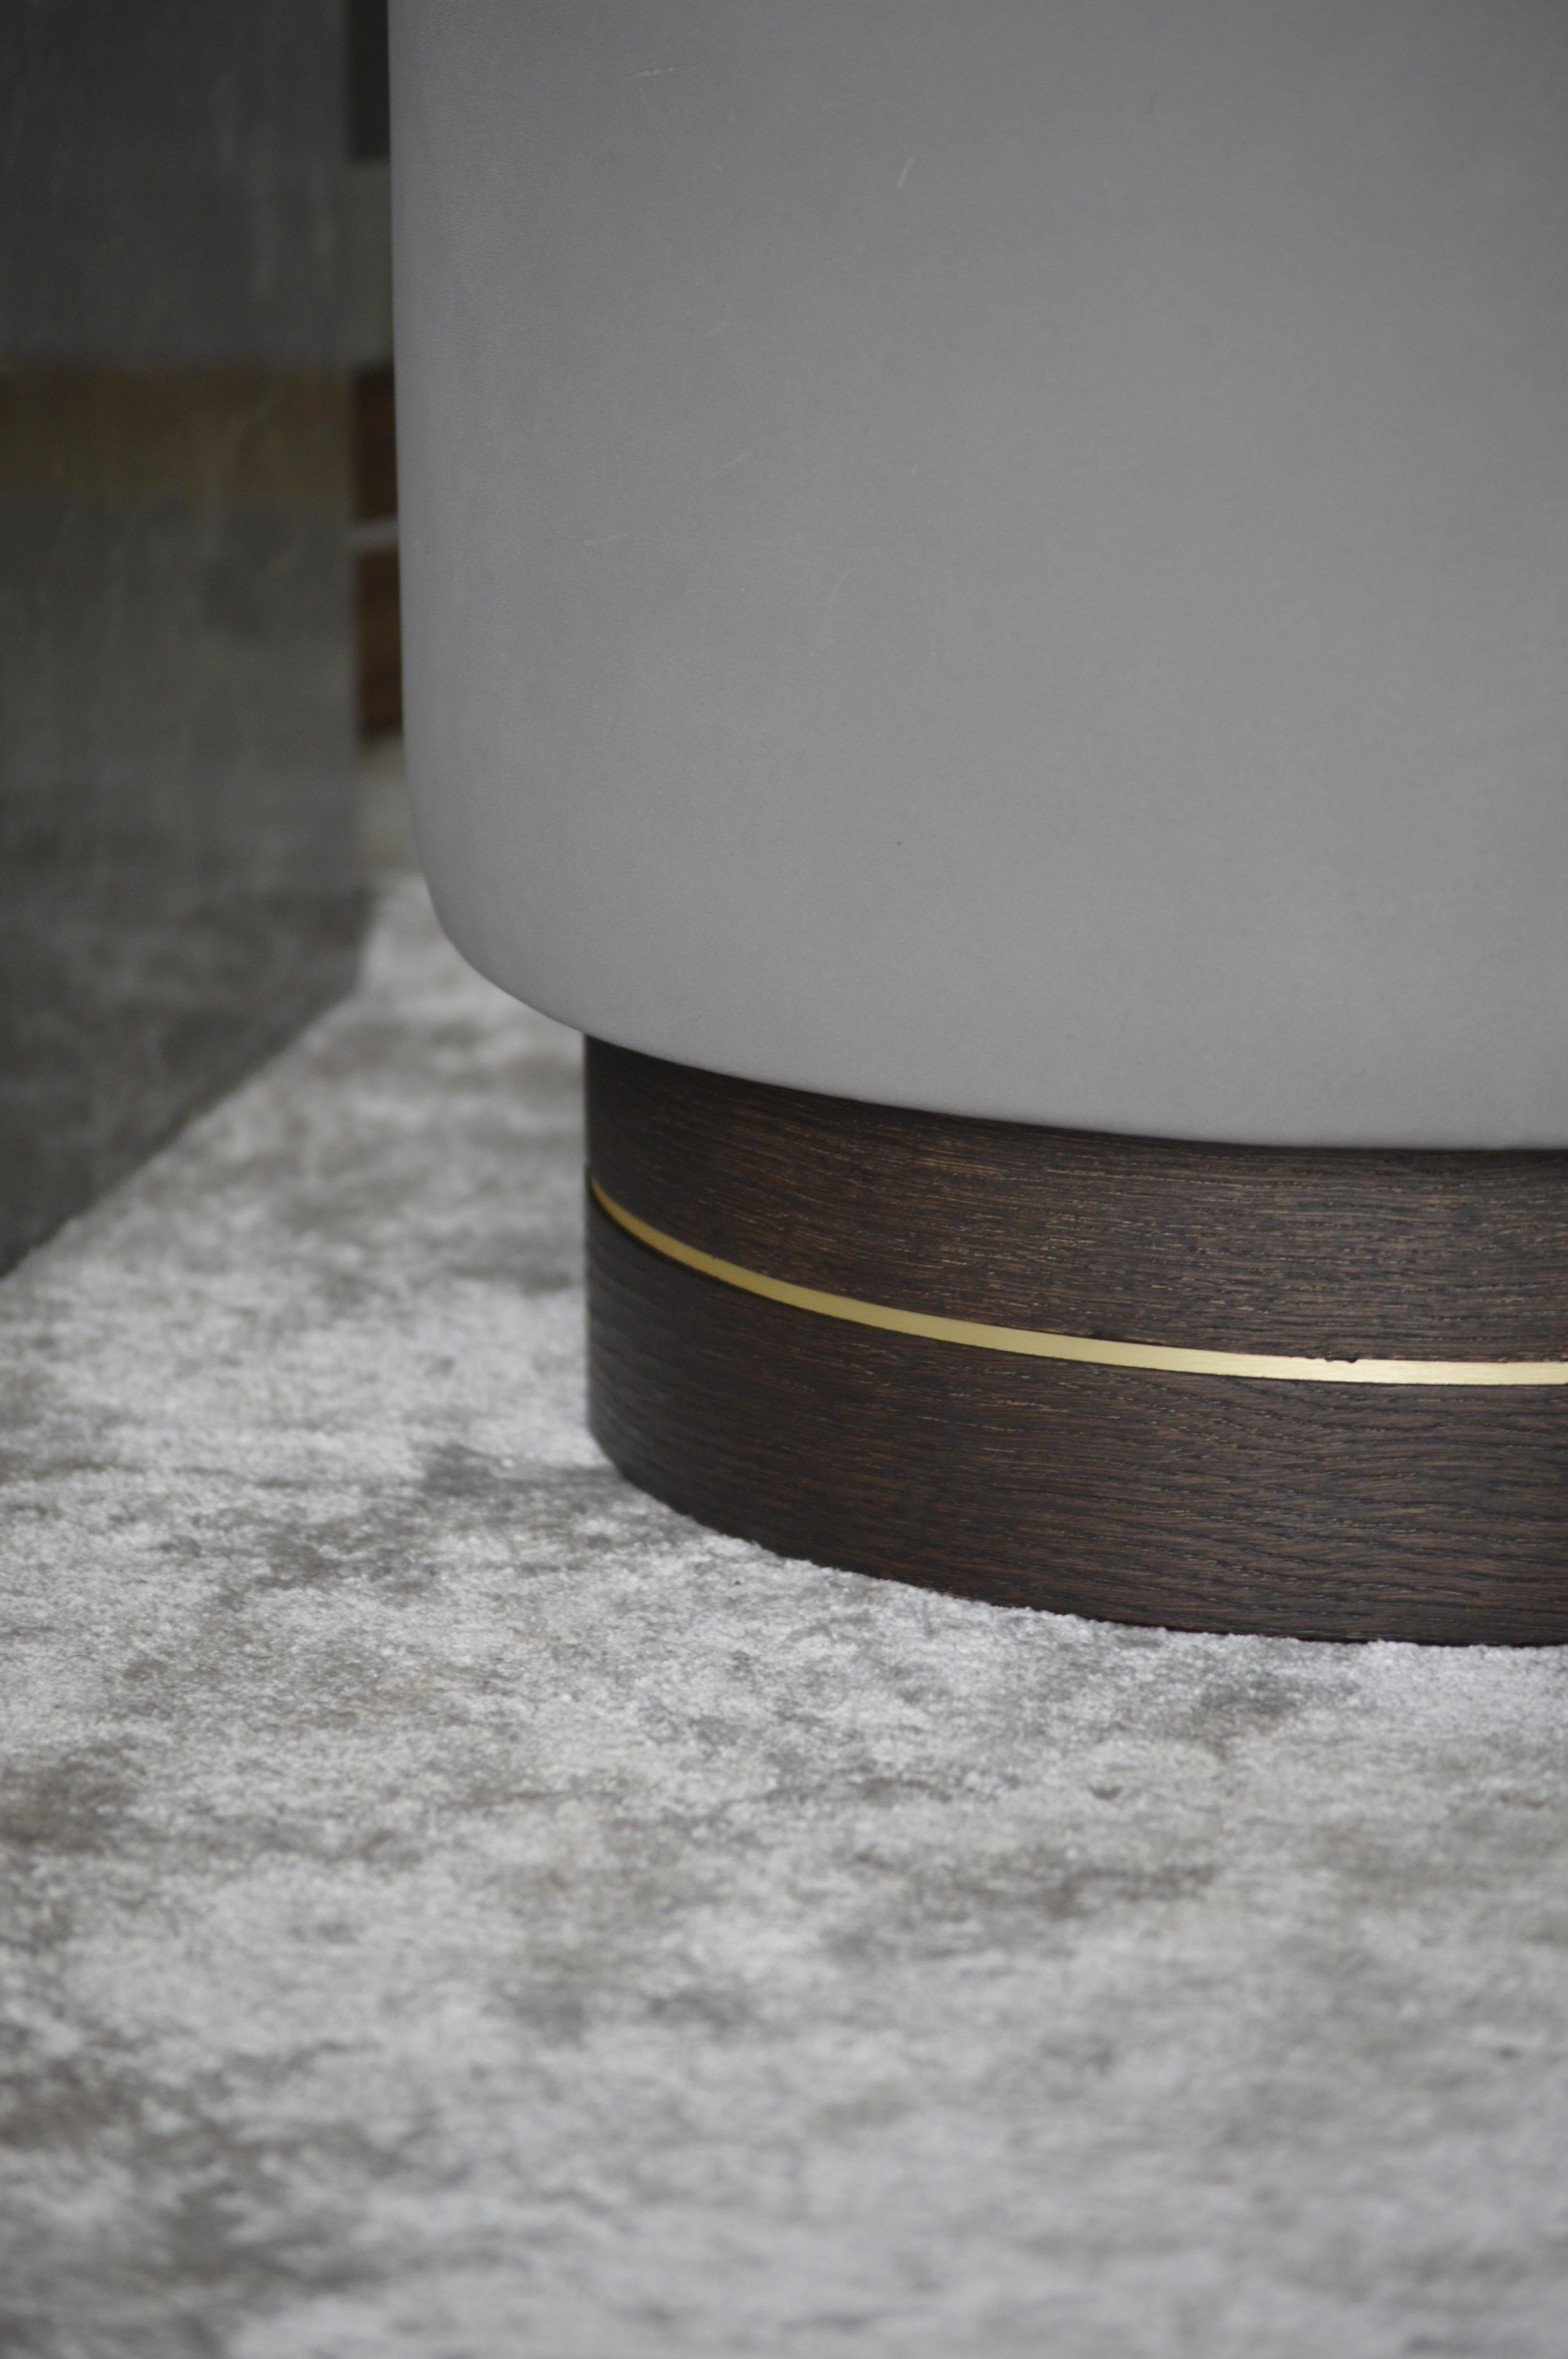 Danish Il Fratellino, Scandinavian Tall Pouf in Suede on a Wooden Base with Brass Décor For Sale